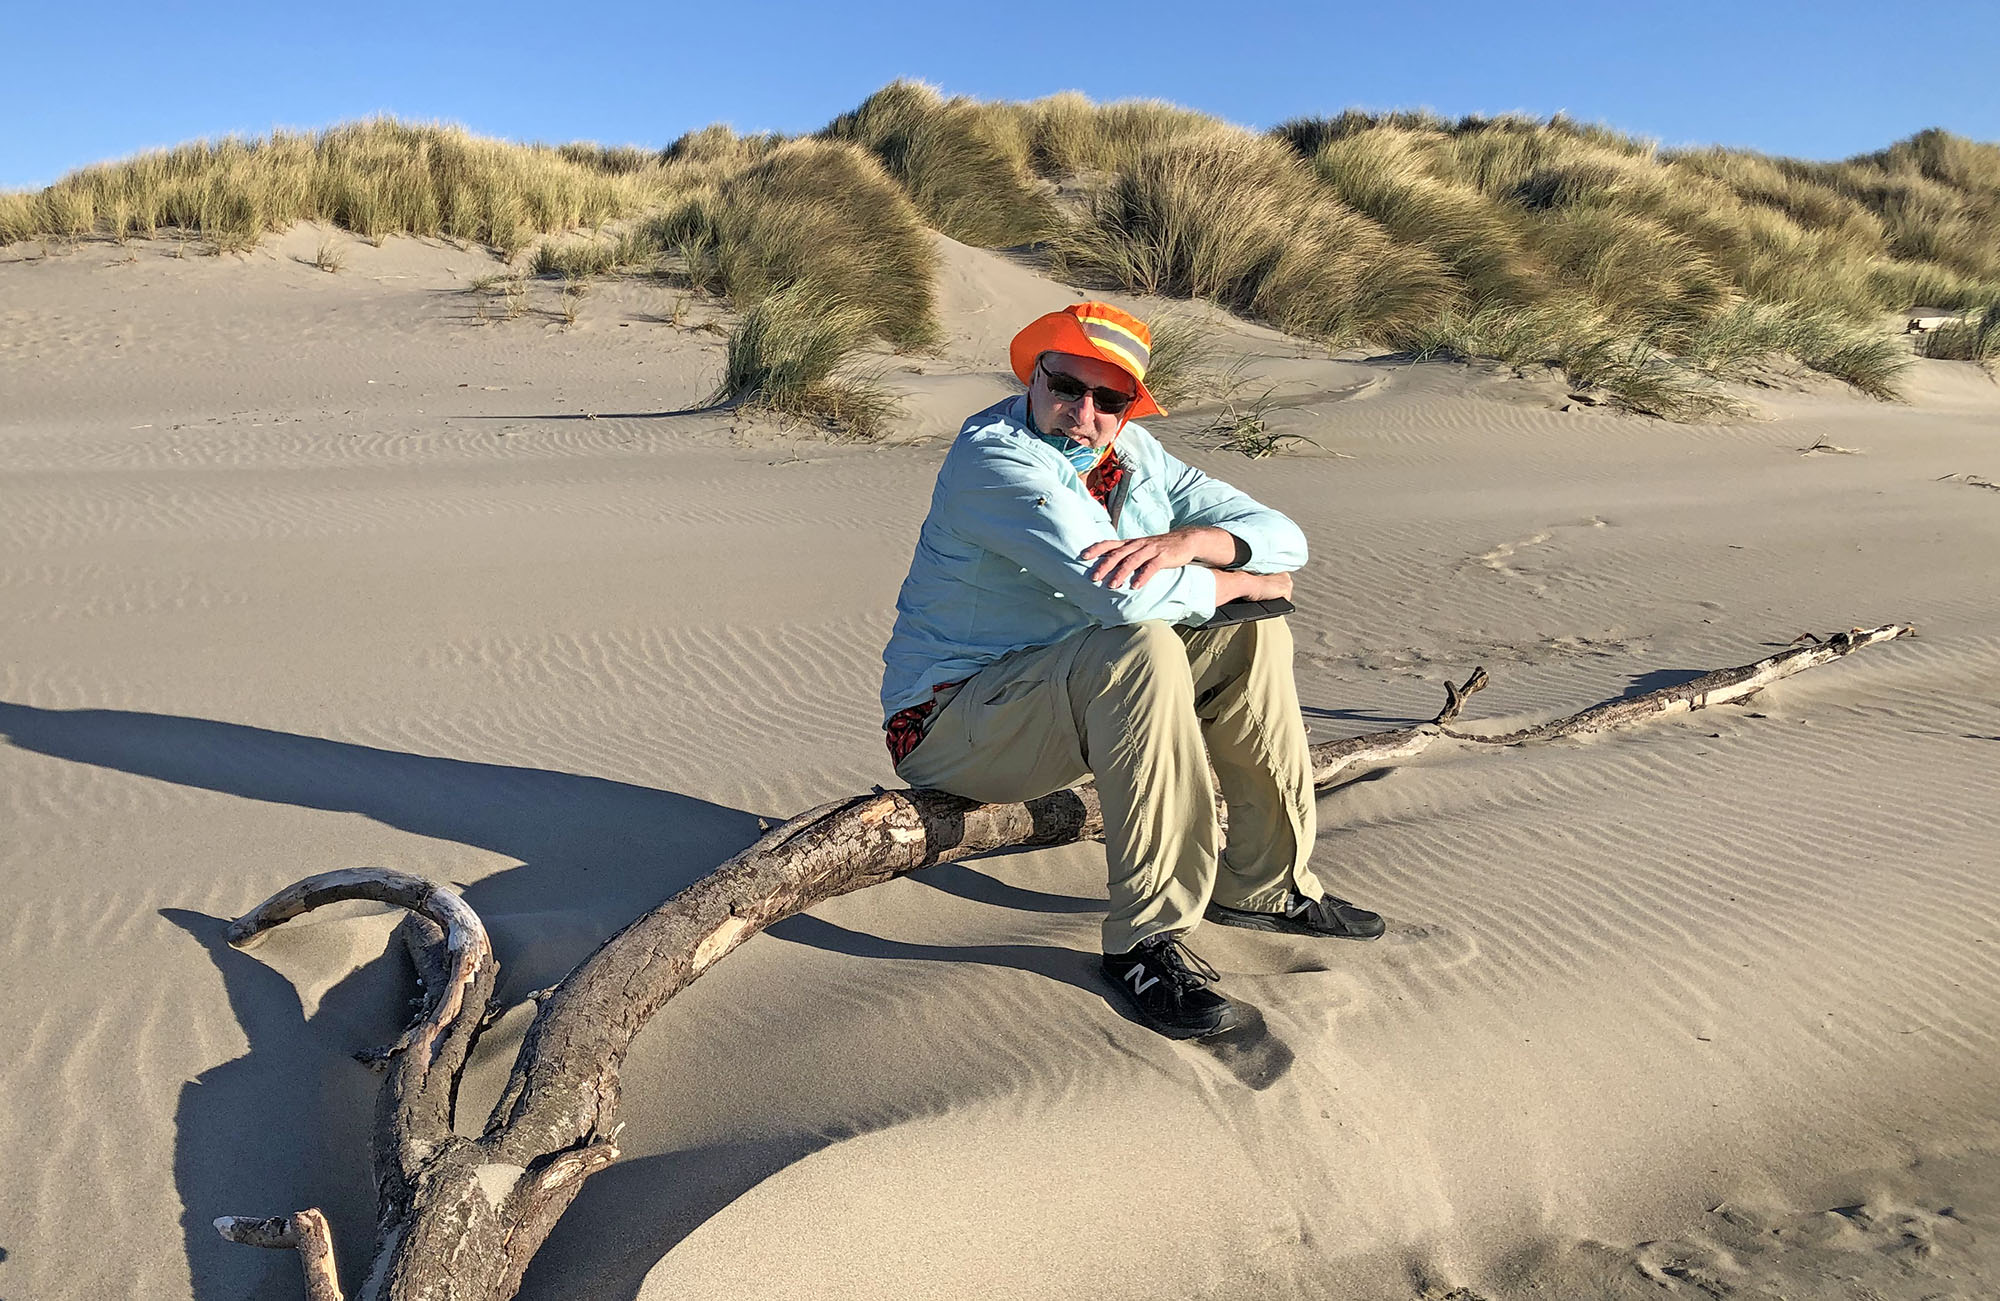 We are big fans of the south Oregon coast.  The beaches are often deserted, the dunes are impressive, and the temperate coastal rainforests are lush.